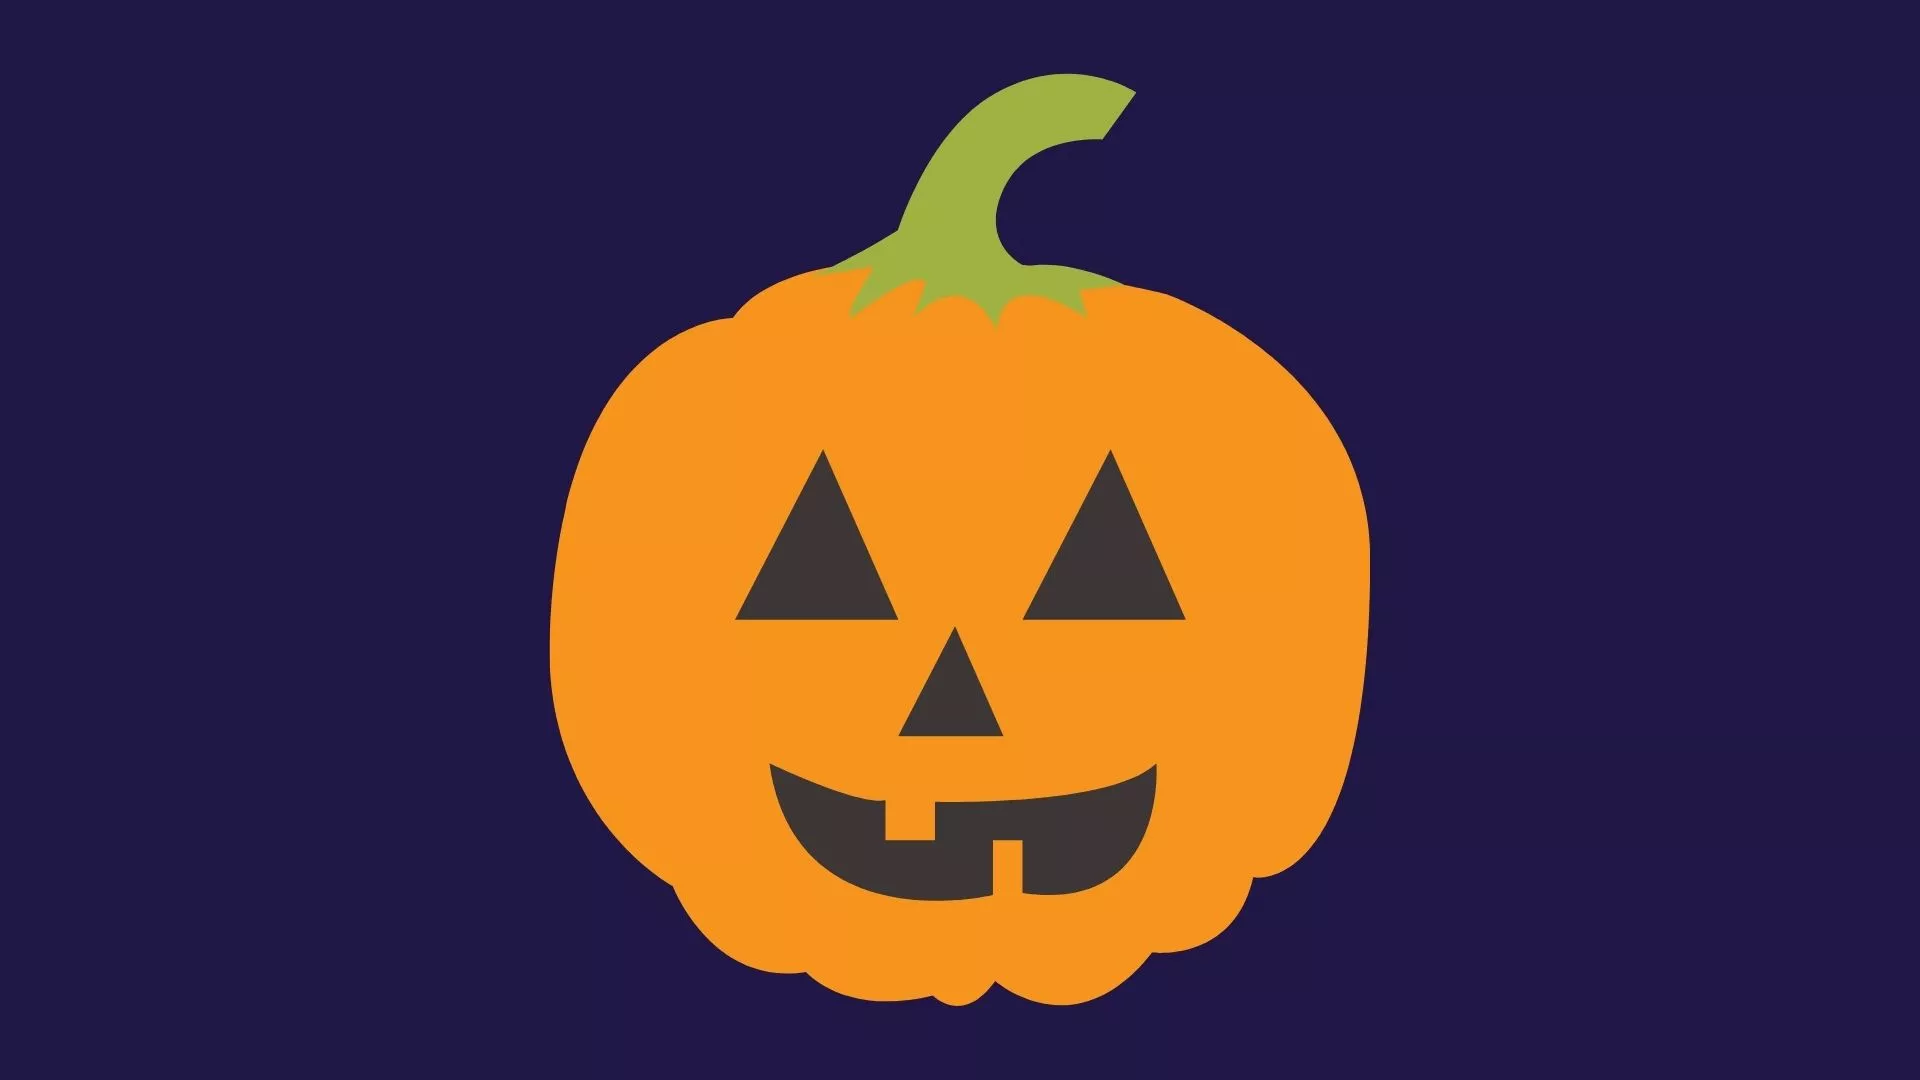 Dark blue background with an illustration of a jack-o-lantern in the foreground